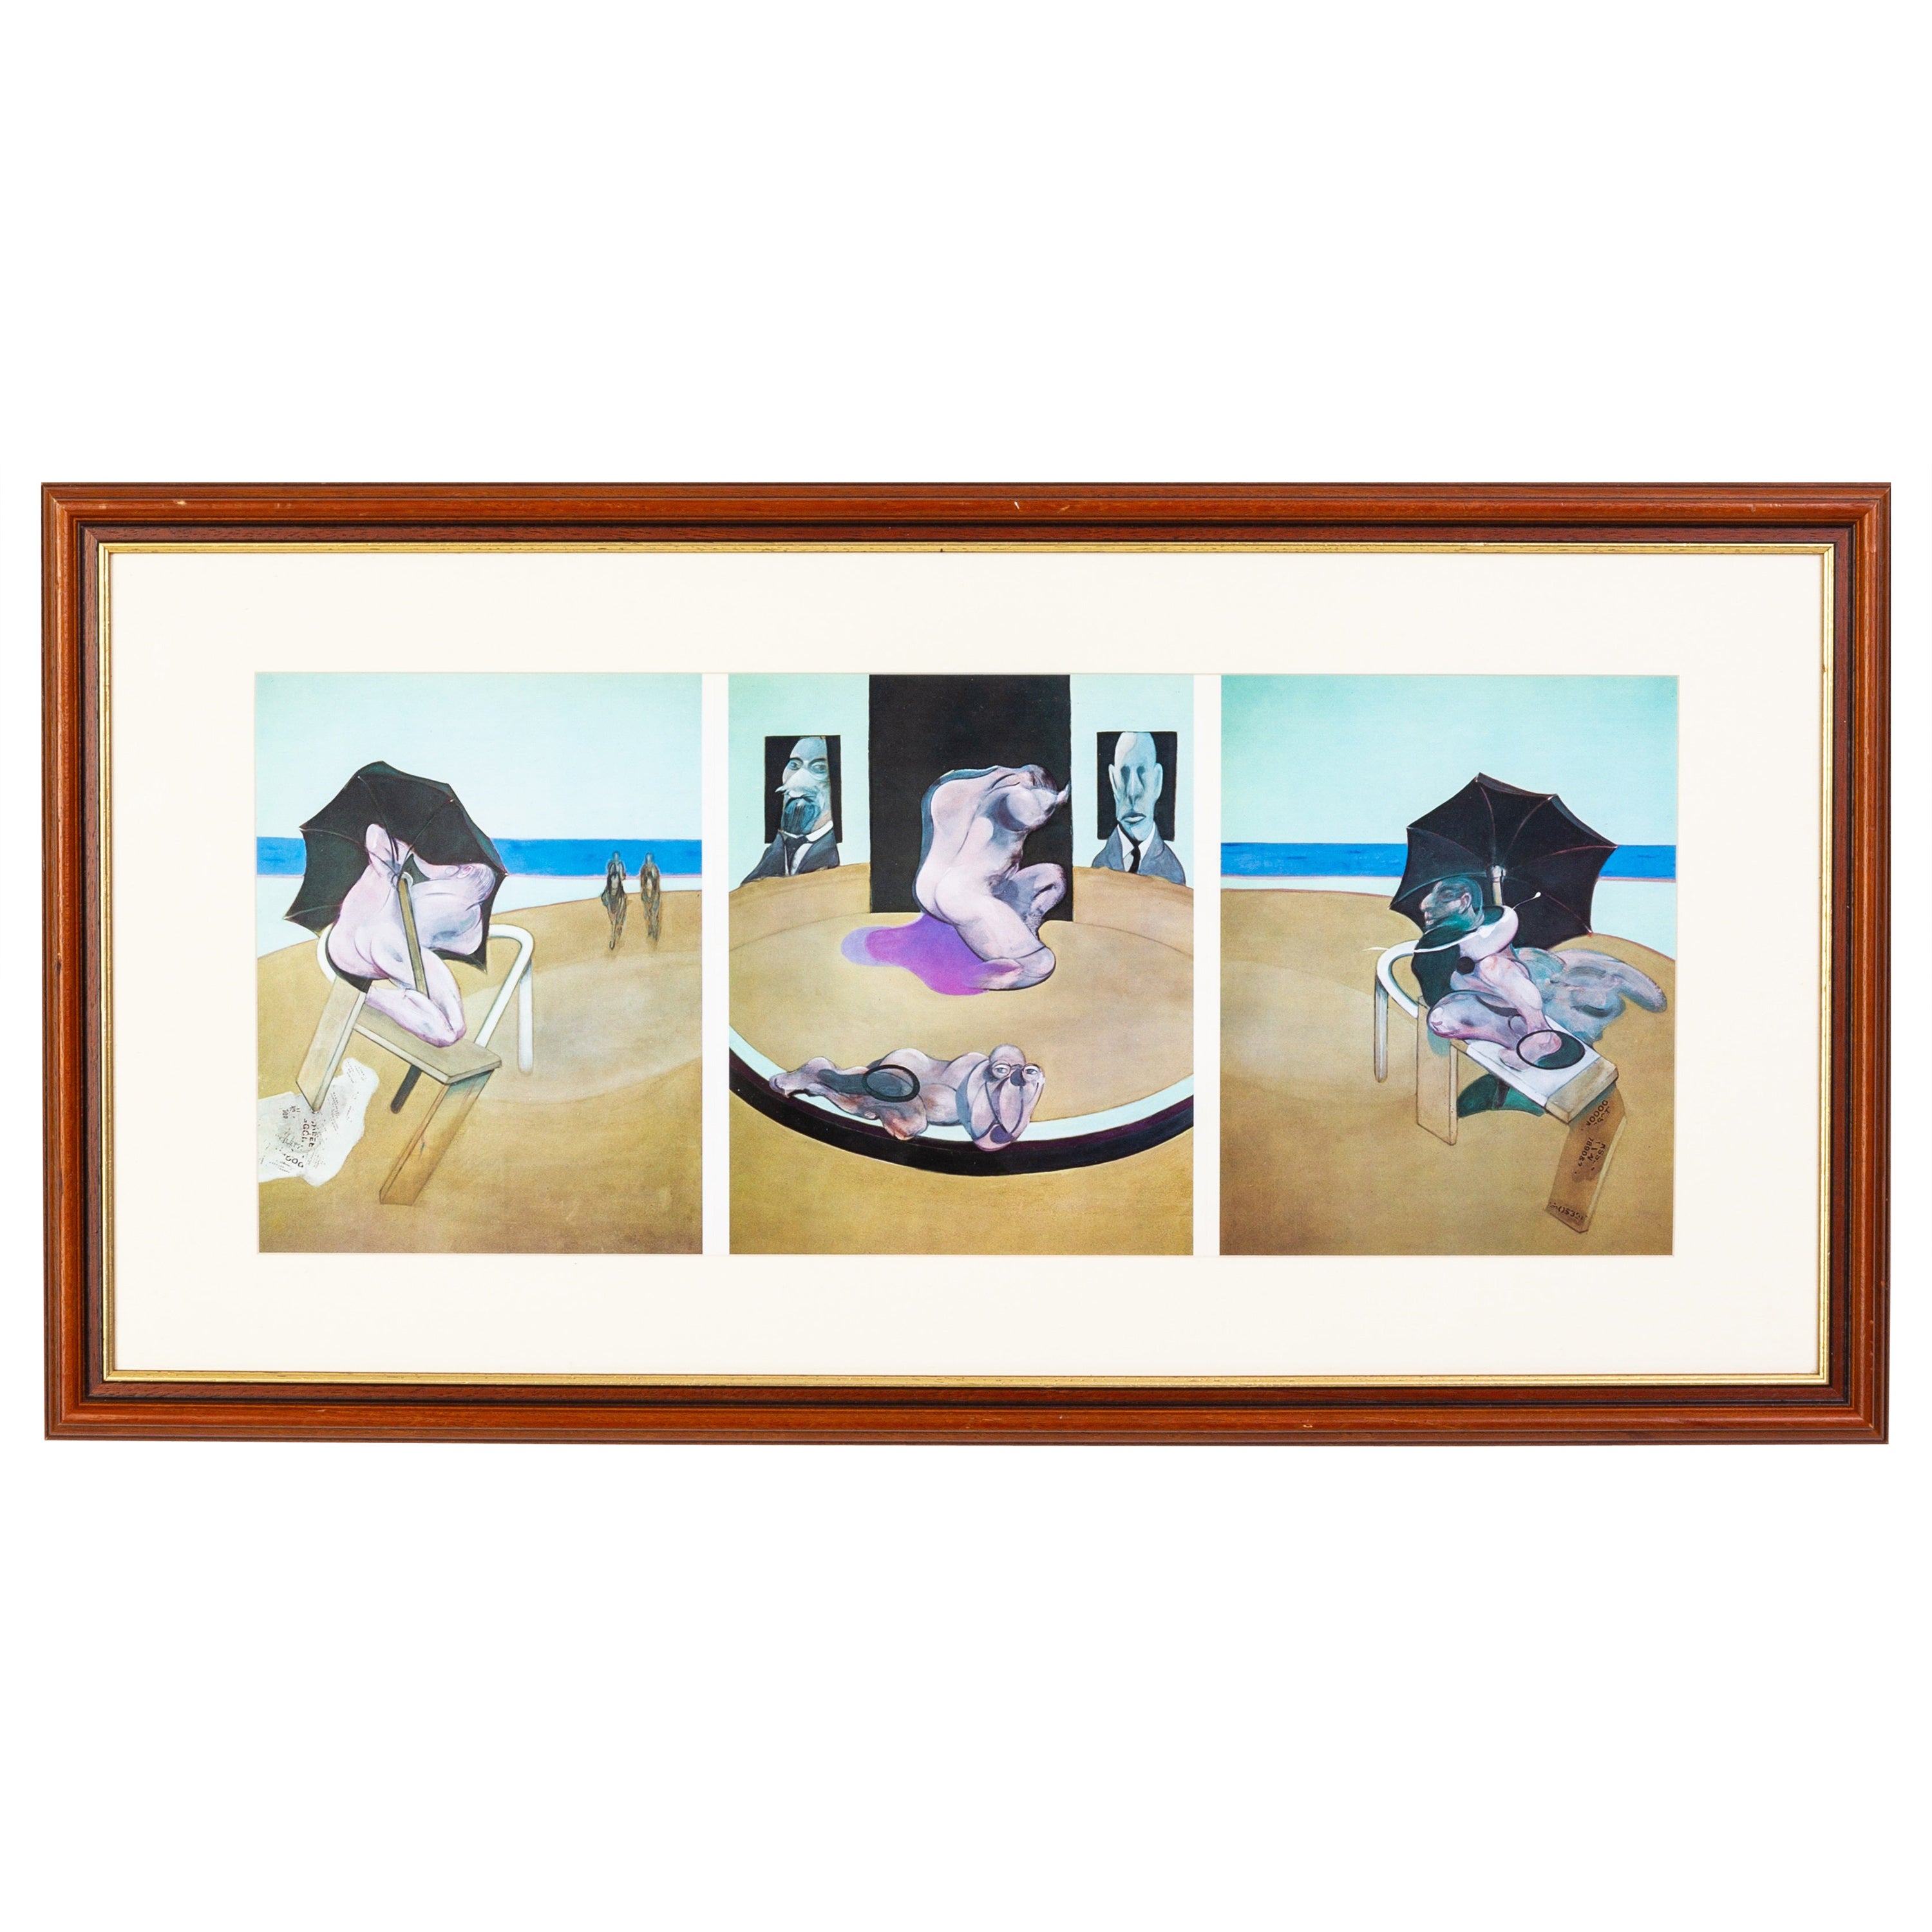 Francis Bacon (1909-1992) Triptych Lithographs 